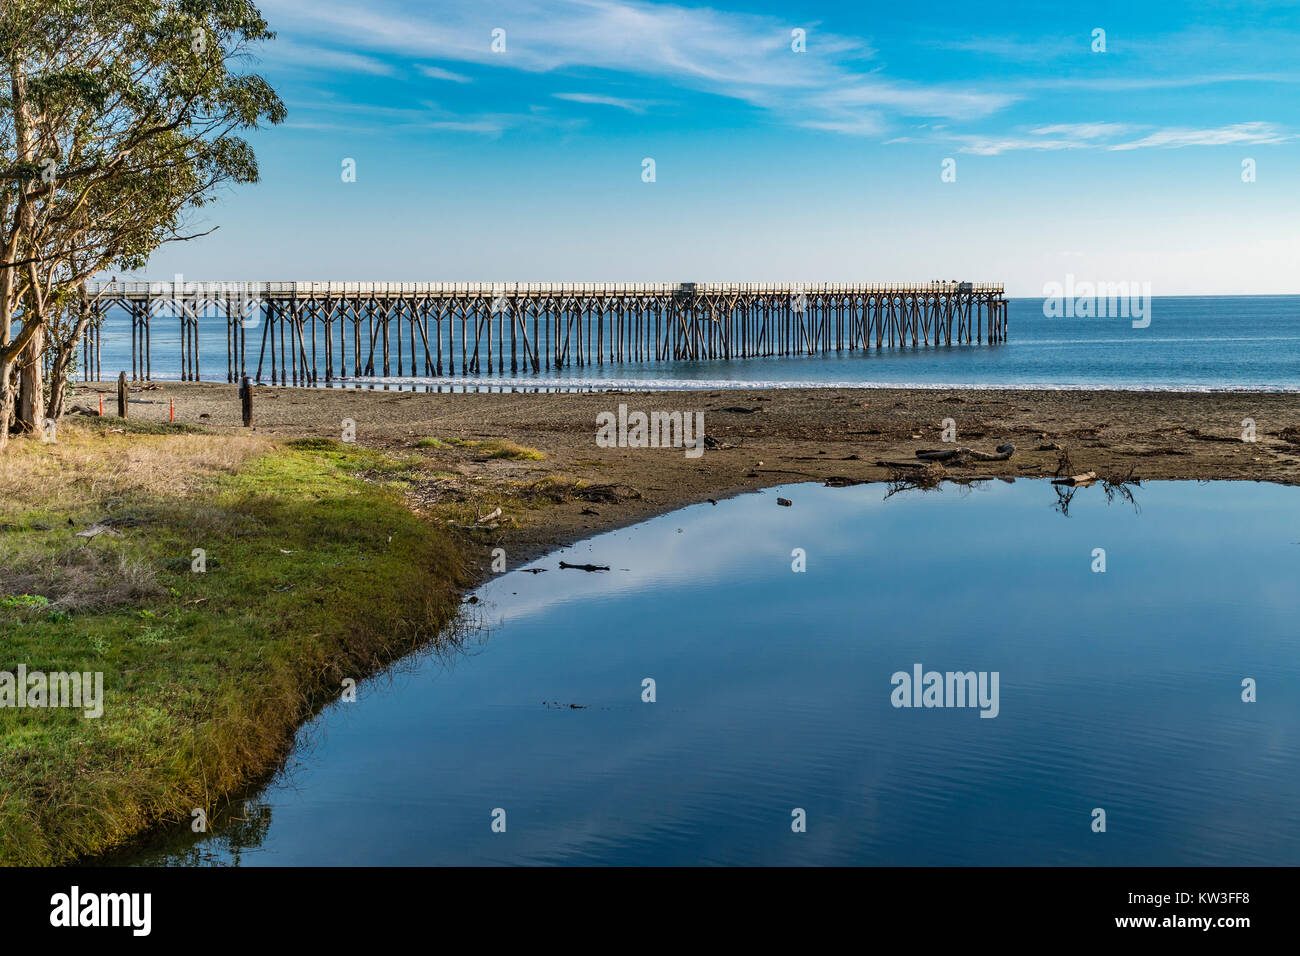 The pier at the William Randolph Hearst Memorial State Beach located near the historic town of San Simeon along California State Route 1, in San Luis  Stock Photo